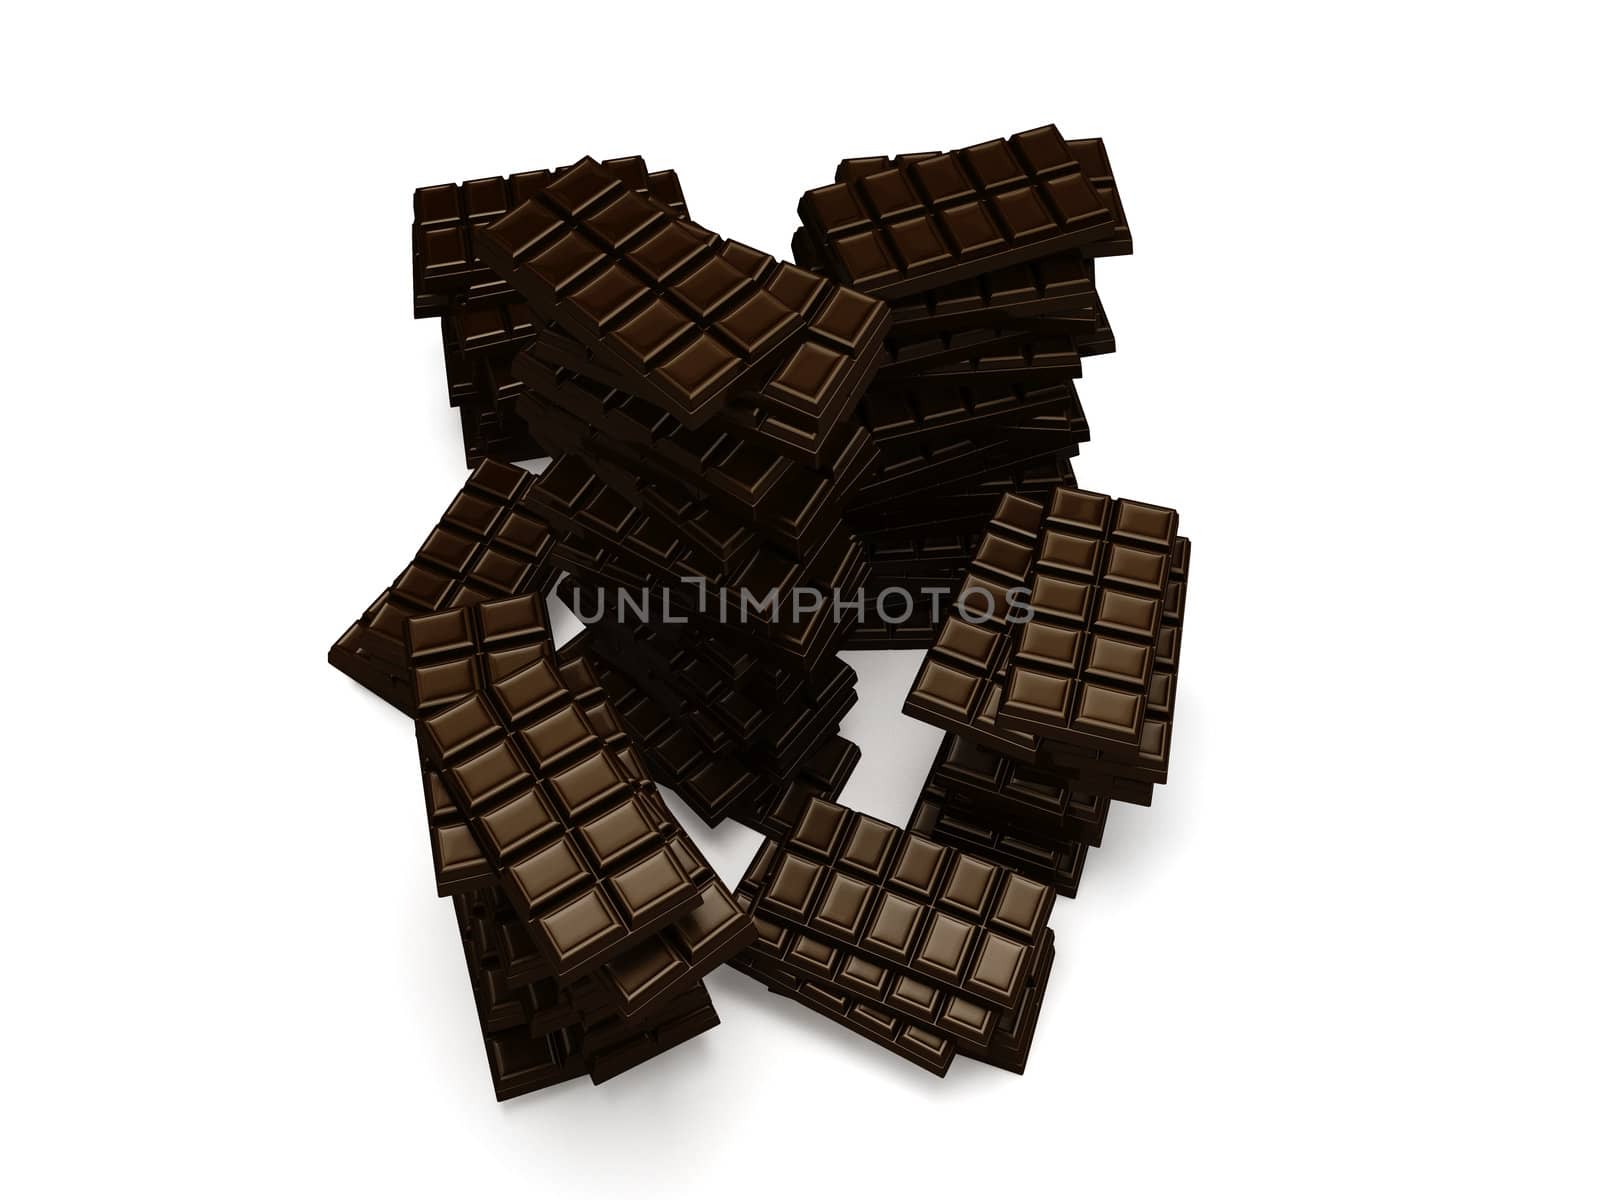 Some Stacks of many Chocolate Bars with a white background